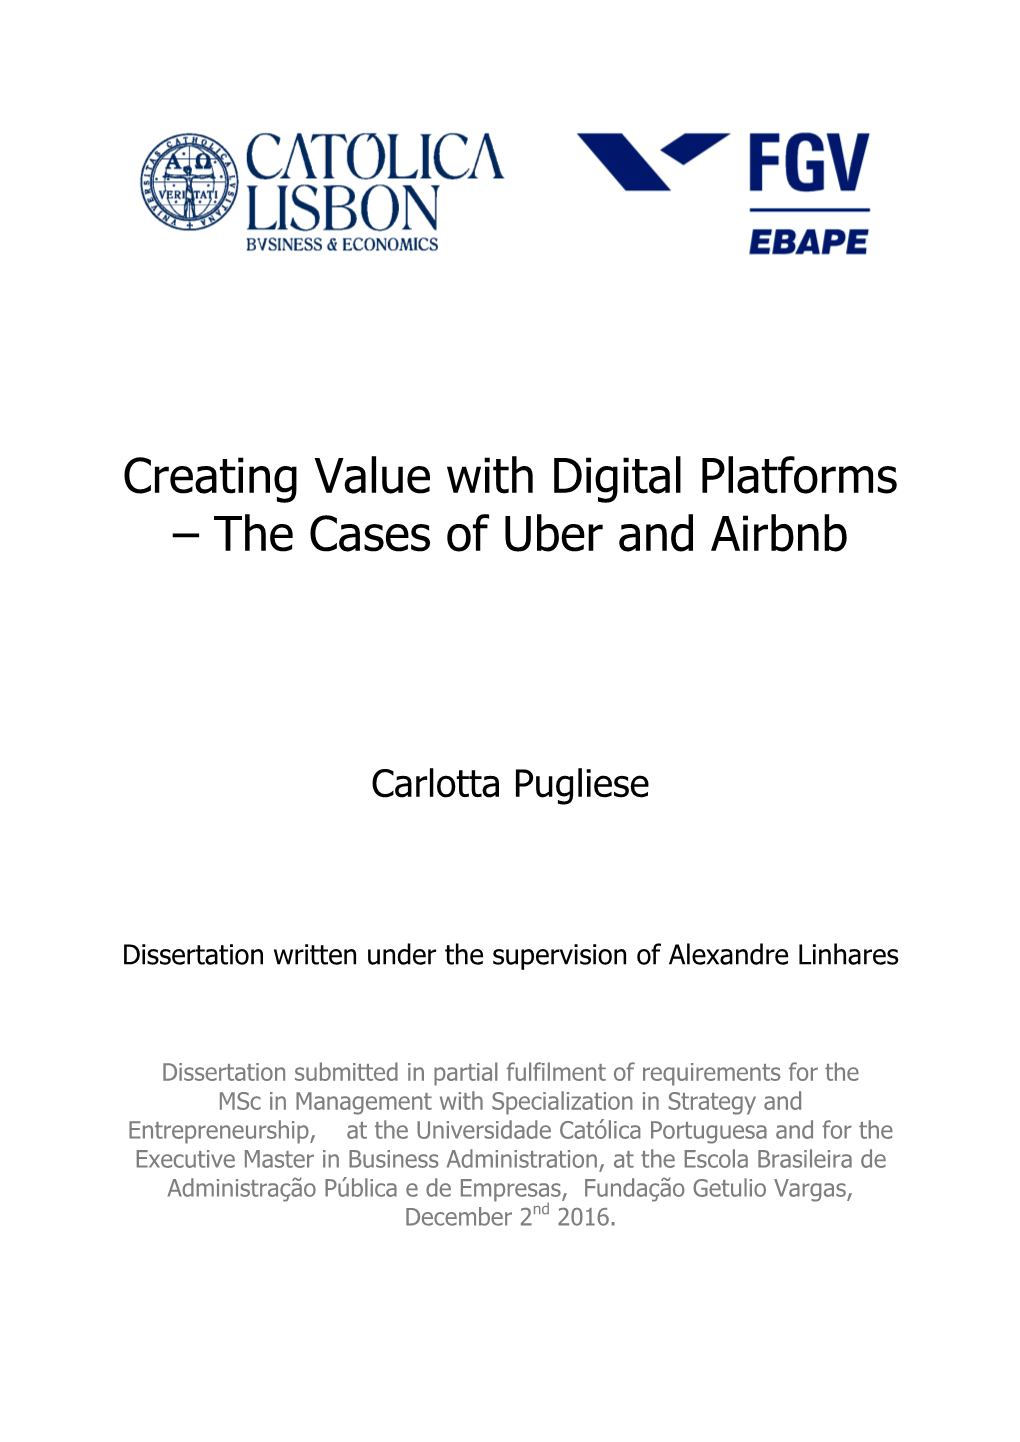 Creating Value with Digital Platforms – the Cases of Uber and Airbnb